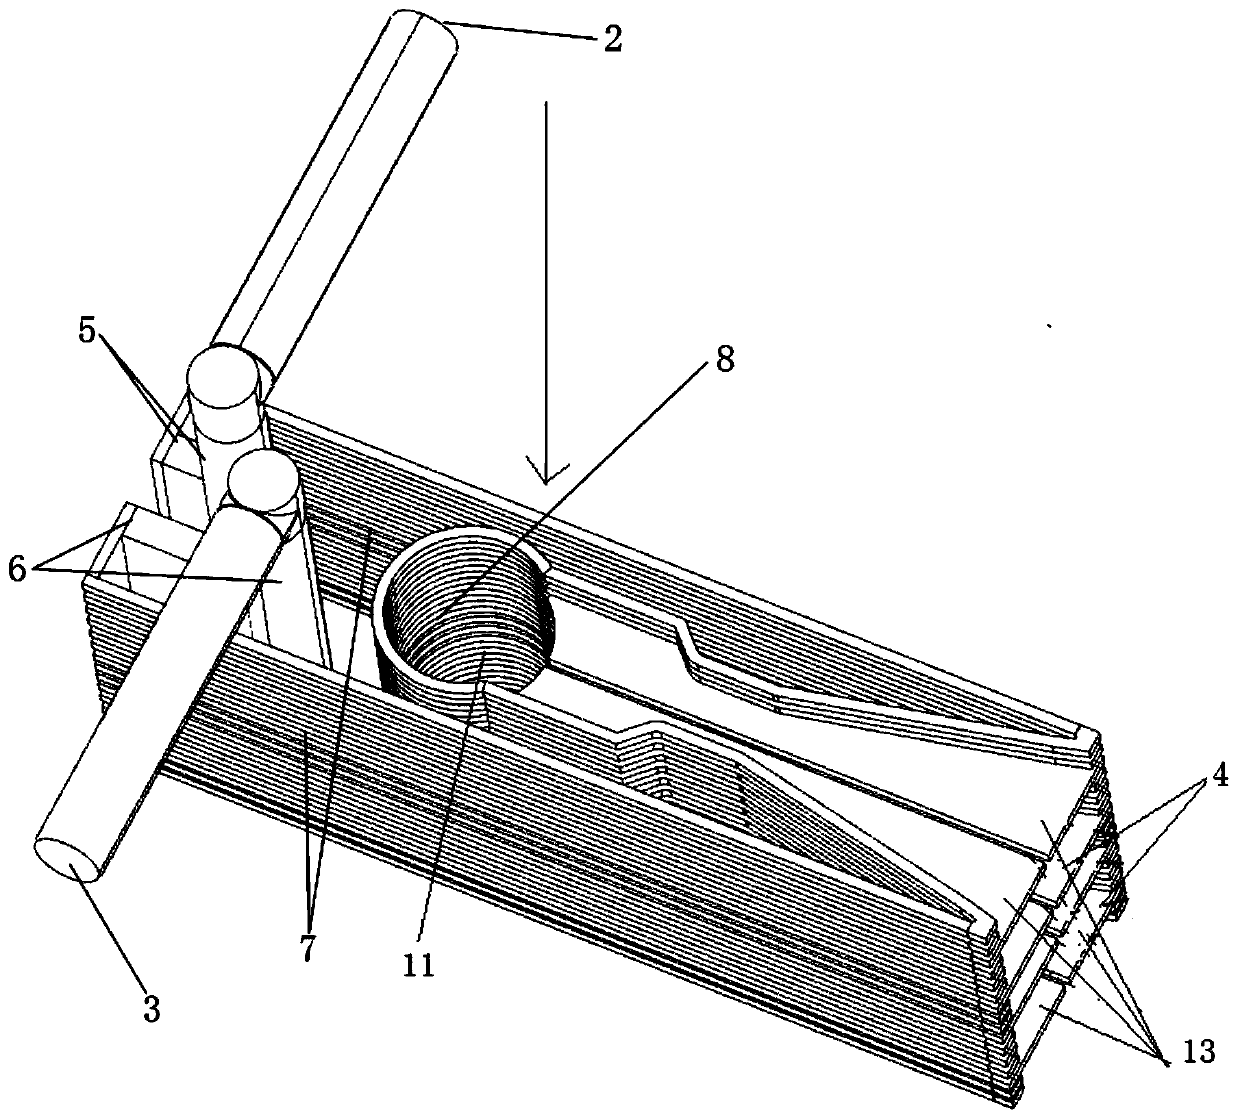 Actively cooled dual-nozzle strut-plate ejection rocket for rocket-based combined-cycle engine